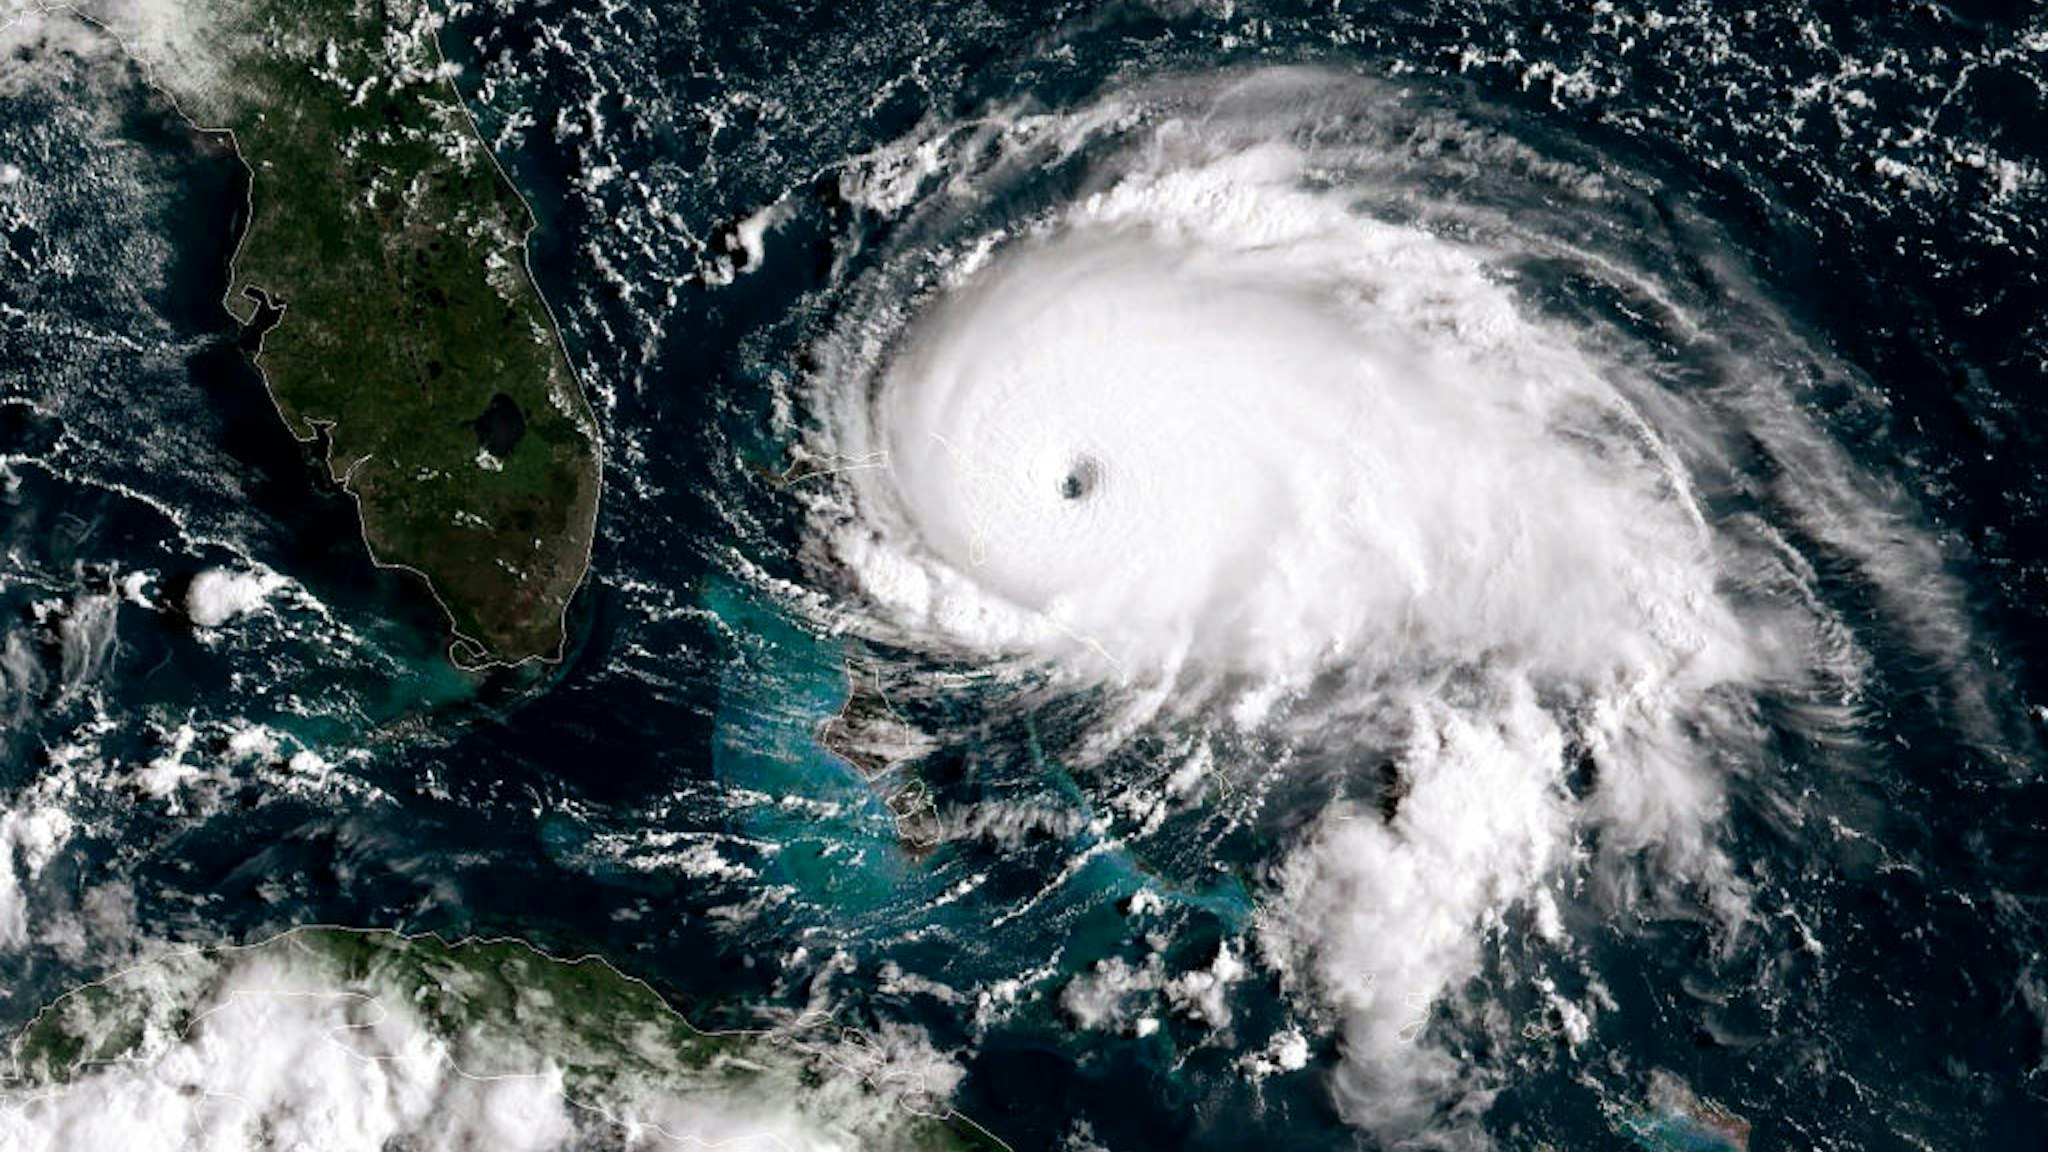 ATLANTIC OCEAN - SEPTEMBER 1: In this NOAA GOES-East satellite handout image, Hurricane Dorian, now a Cat. 5 storm, tracks towards the Florida coast taken at 13:20Z September 1, 2019 in the Atlantic Ocean. A hurricane warning is in effect for much of the northwestern Bahamas as it gets hit with 175 mph winds. According to the National Hurricane Center Dorian is predicted to hit the U.S. as a Category 4 storm.